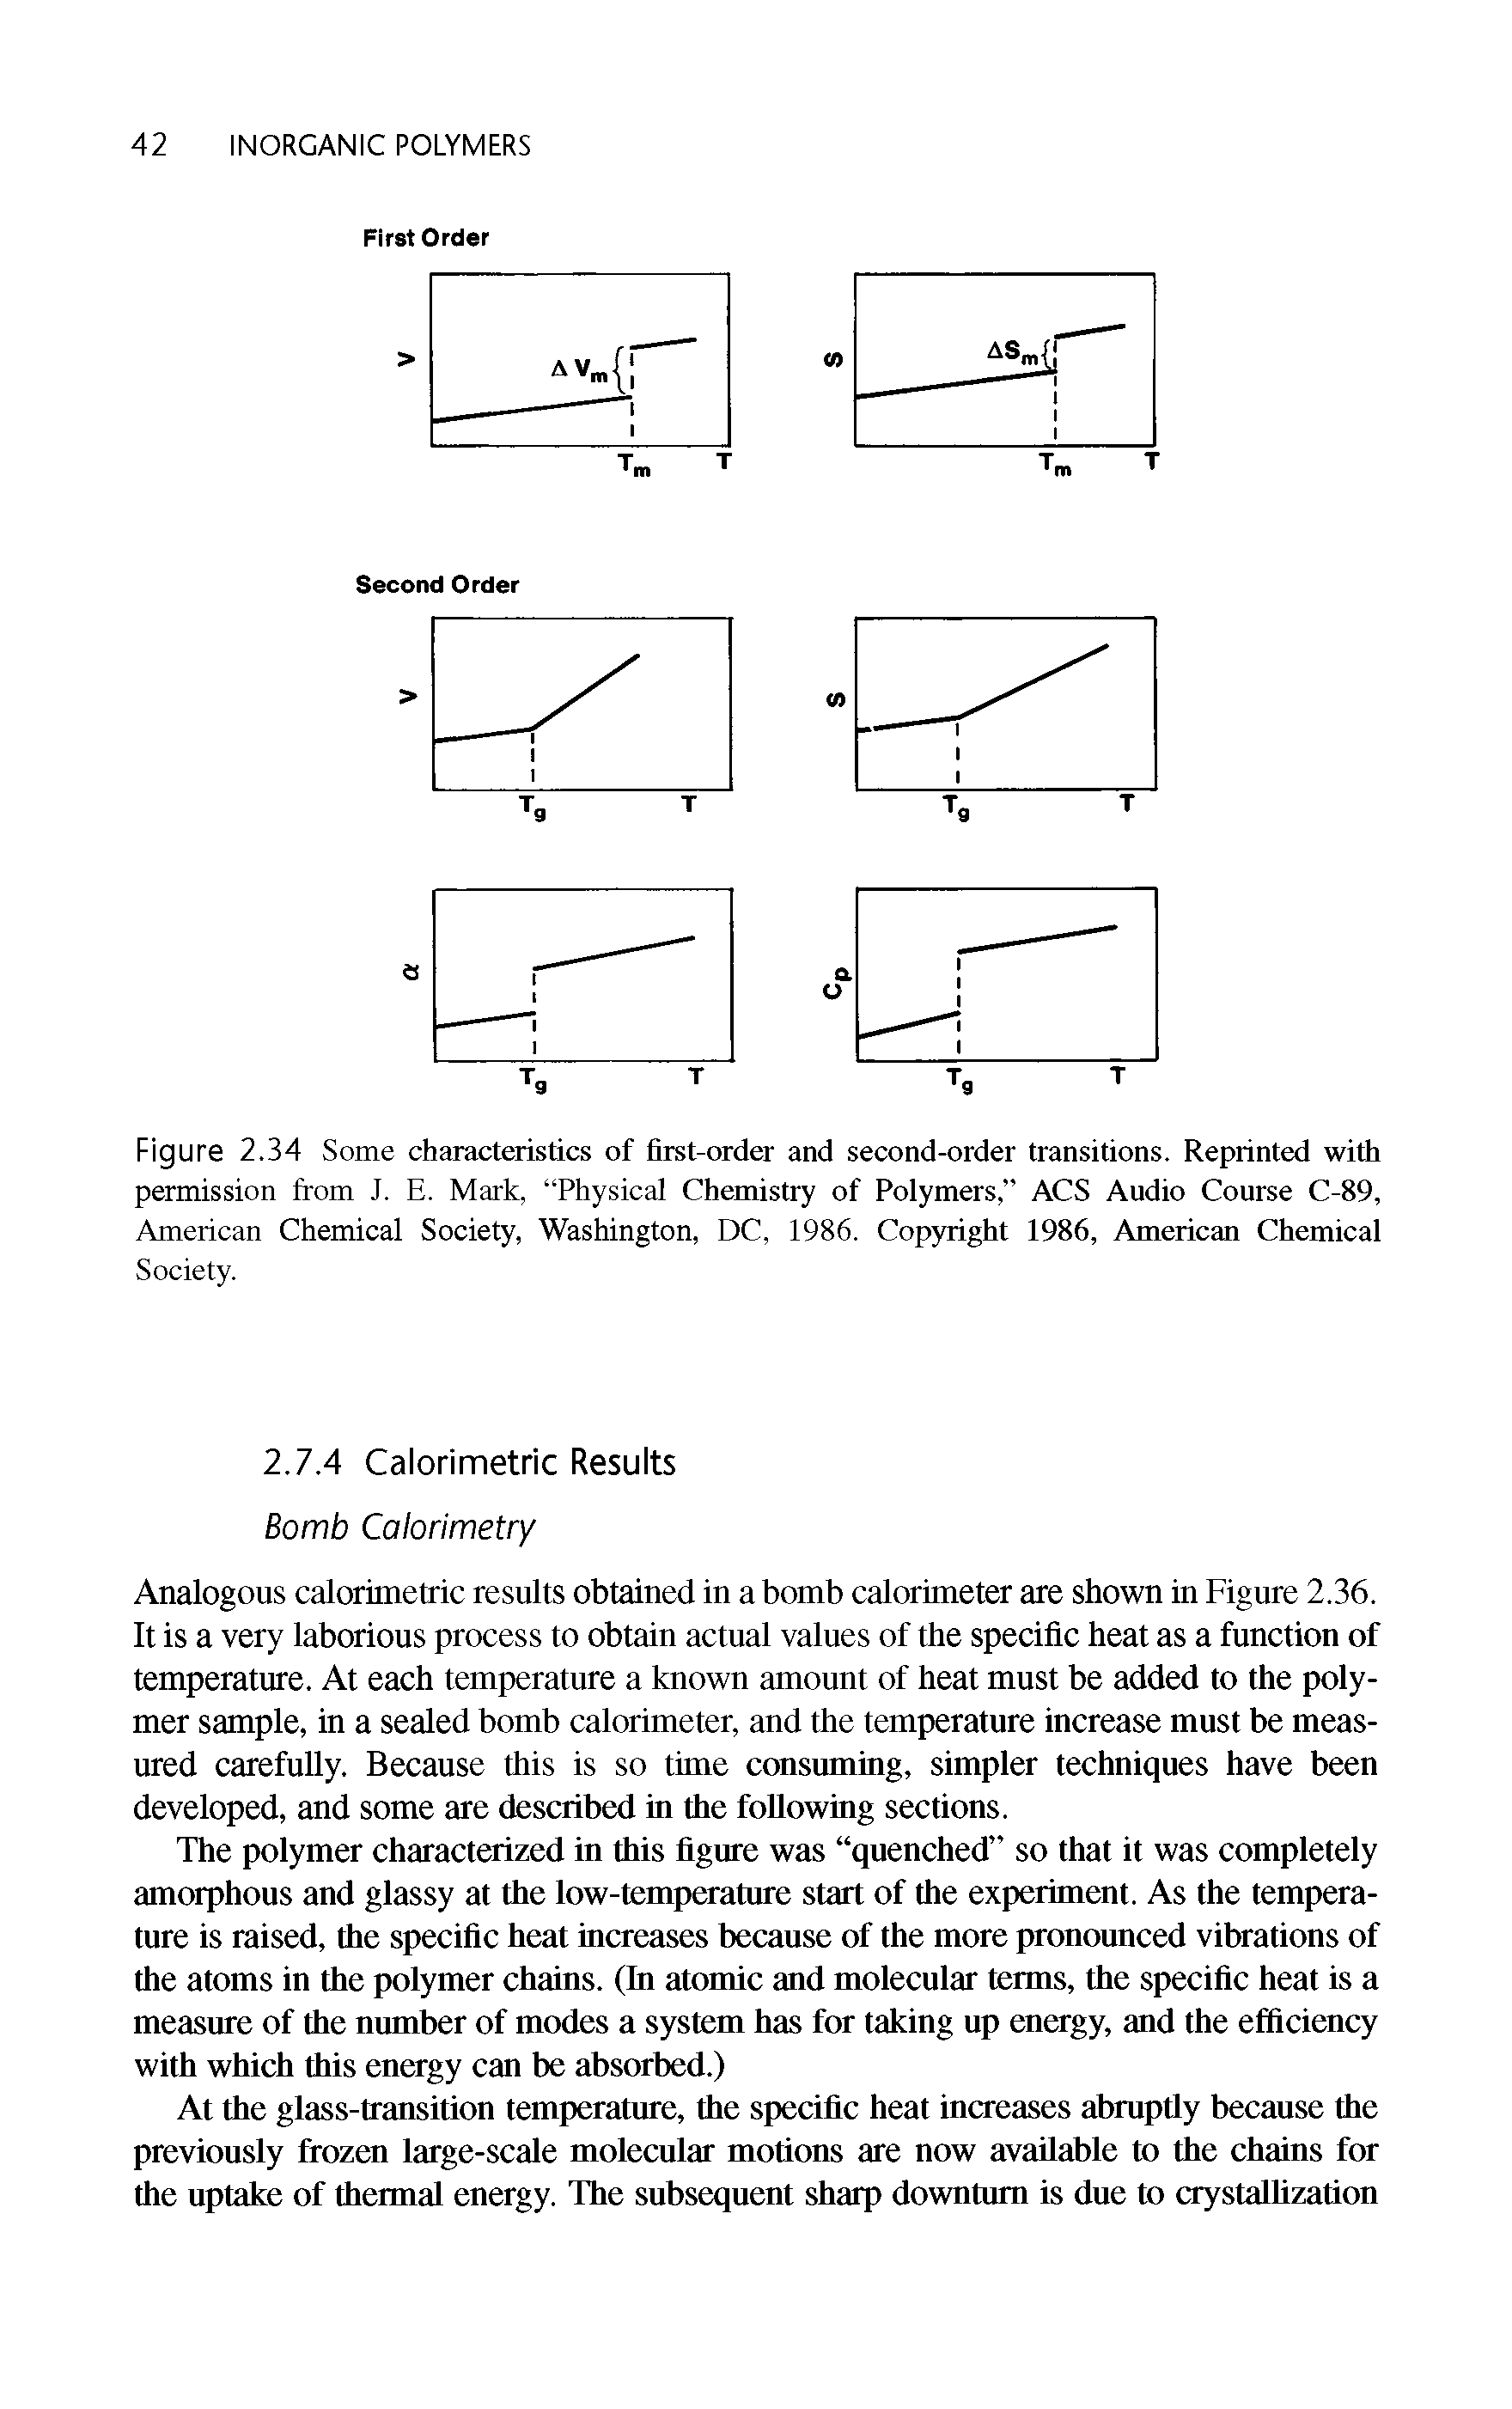 Figure 2.34 Some characteristics of first-order and second-order transitions. Reprinted with permission from J. E. Mark, Physical Chemistry of Polymers, ACS Audio Course C-89, American Chemical Society, Washington, DC, 1986. Copyright 1986, American Chemical Society.